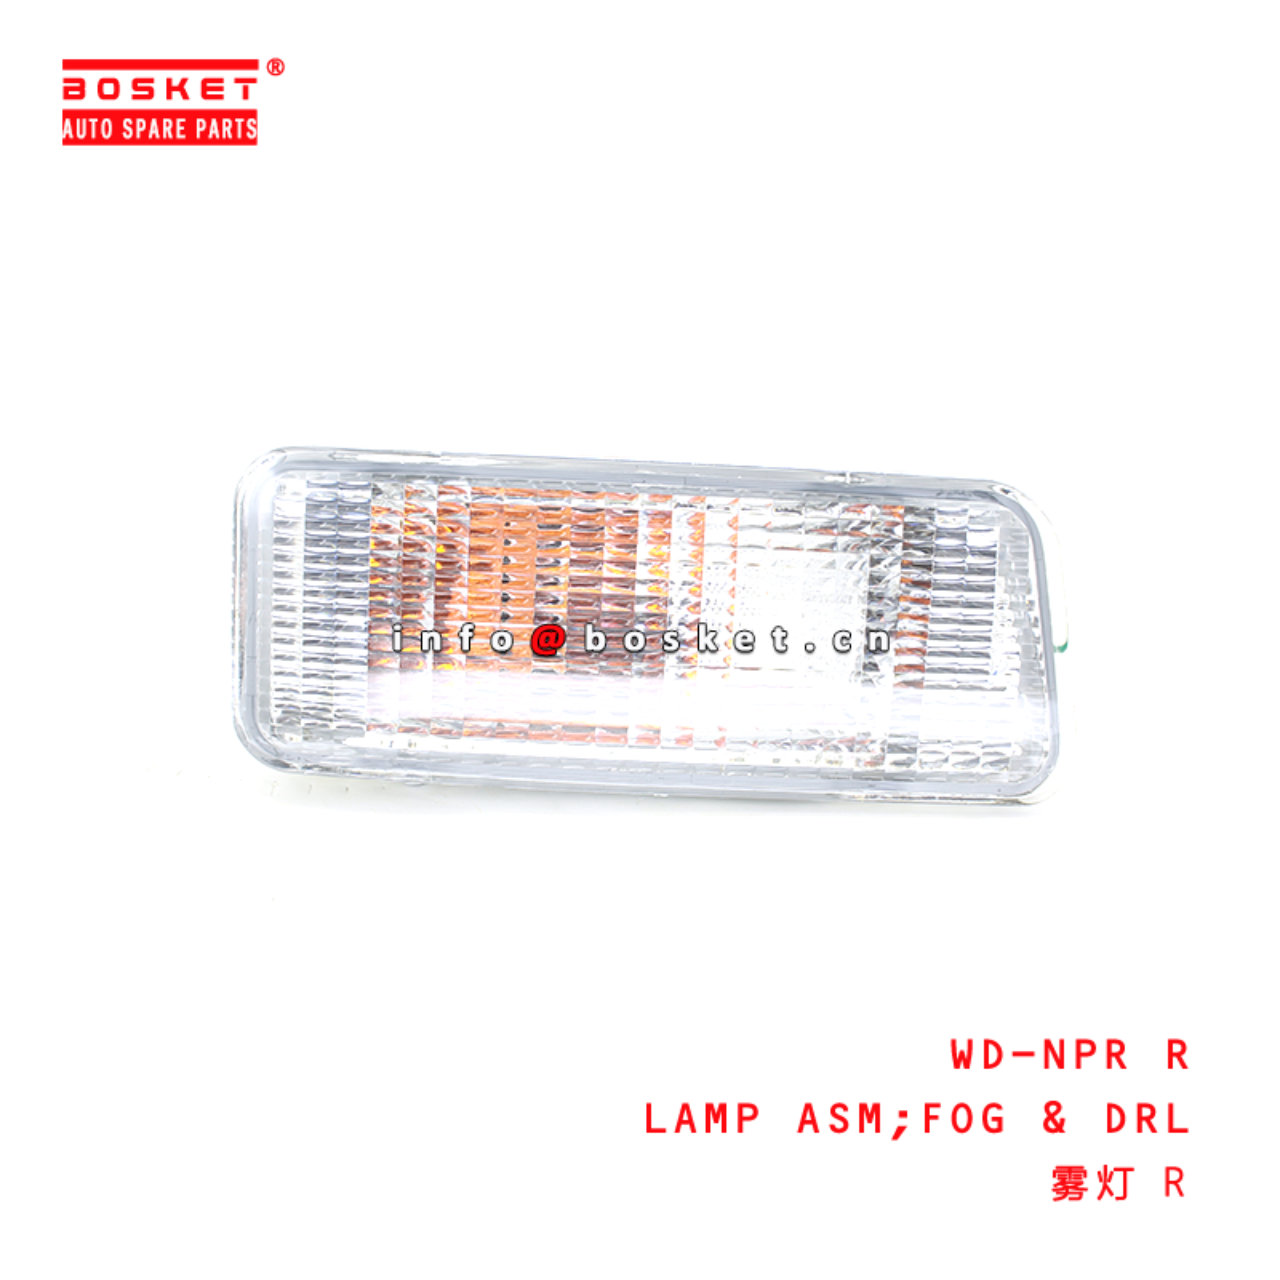 WD-NPR R Fog And Drl Lamp Assembly Suitable for ISUZU NPR WD-NPR R